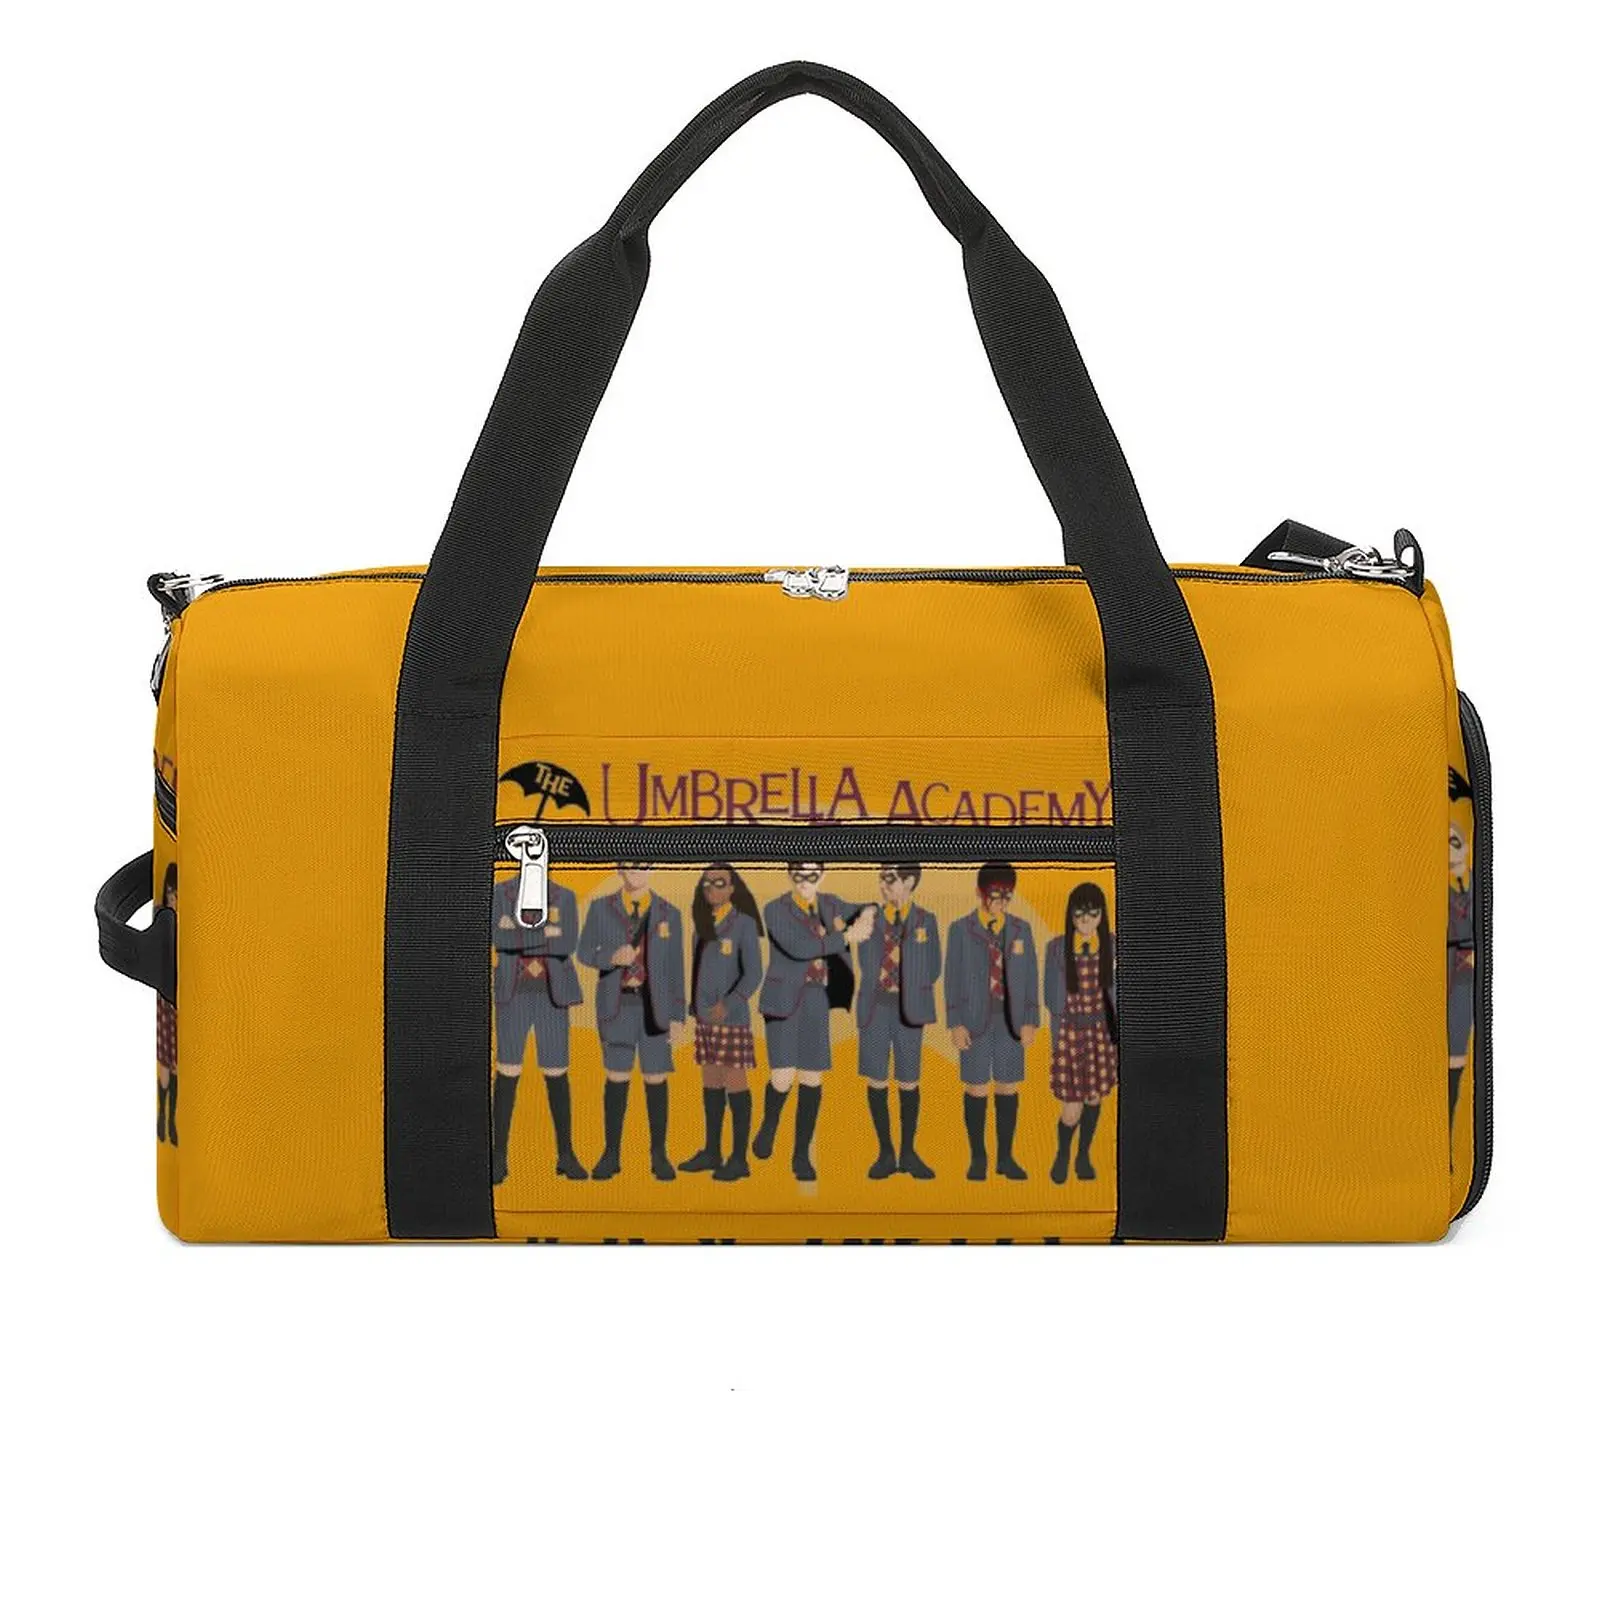 

The Umbrella Academy Group Gym Bag Classic American TV Show Training Sports Bags Couple Colorful Fitness Bag Weekend Handbags